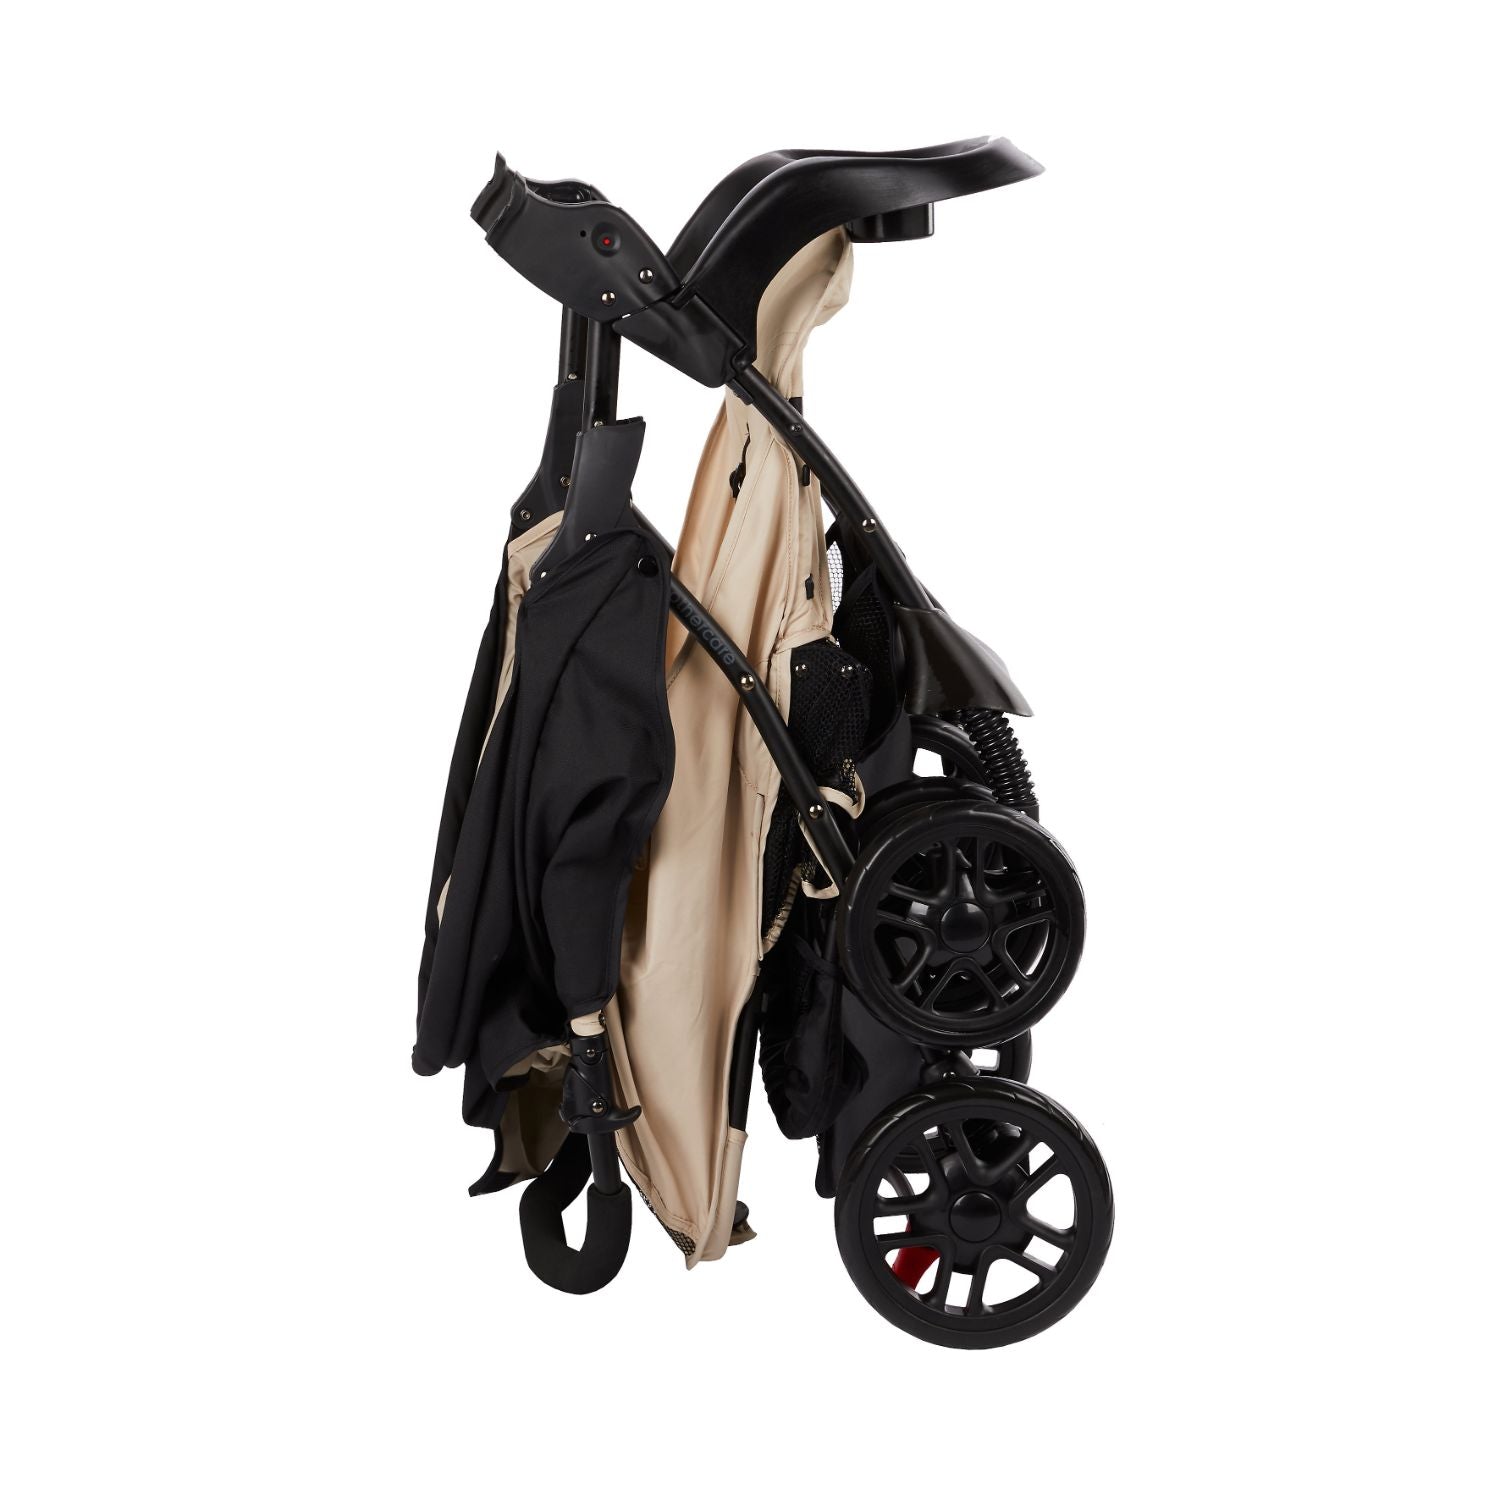 Mothercare U-Move Pushchair Travel System - Sand